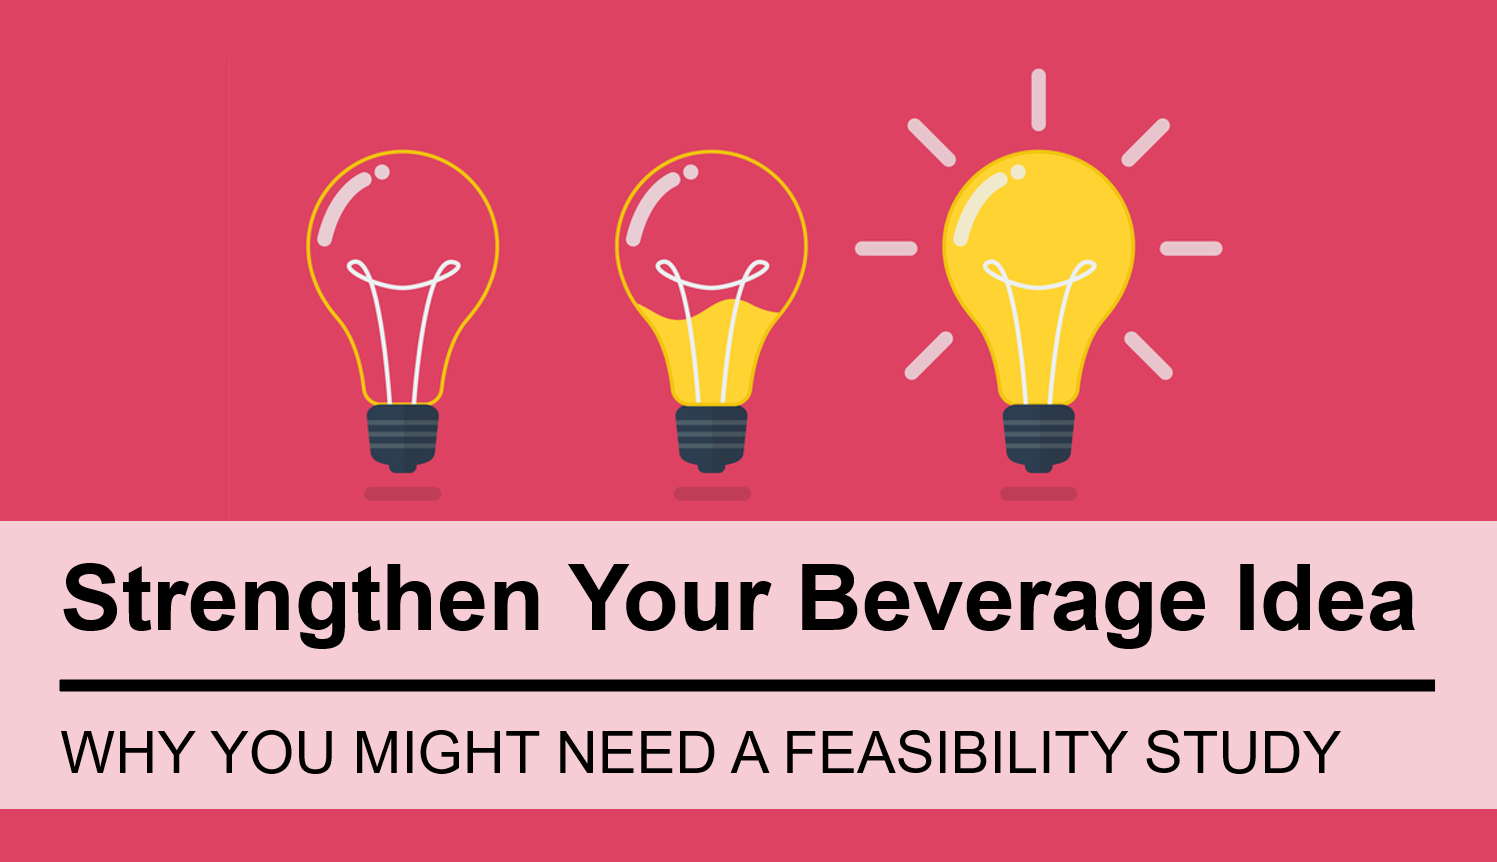 Strengthen your beverage idea with a Feasibility Study